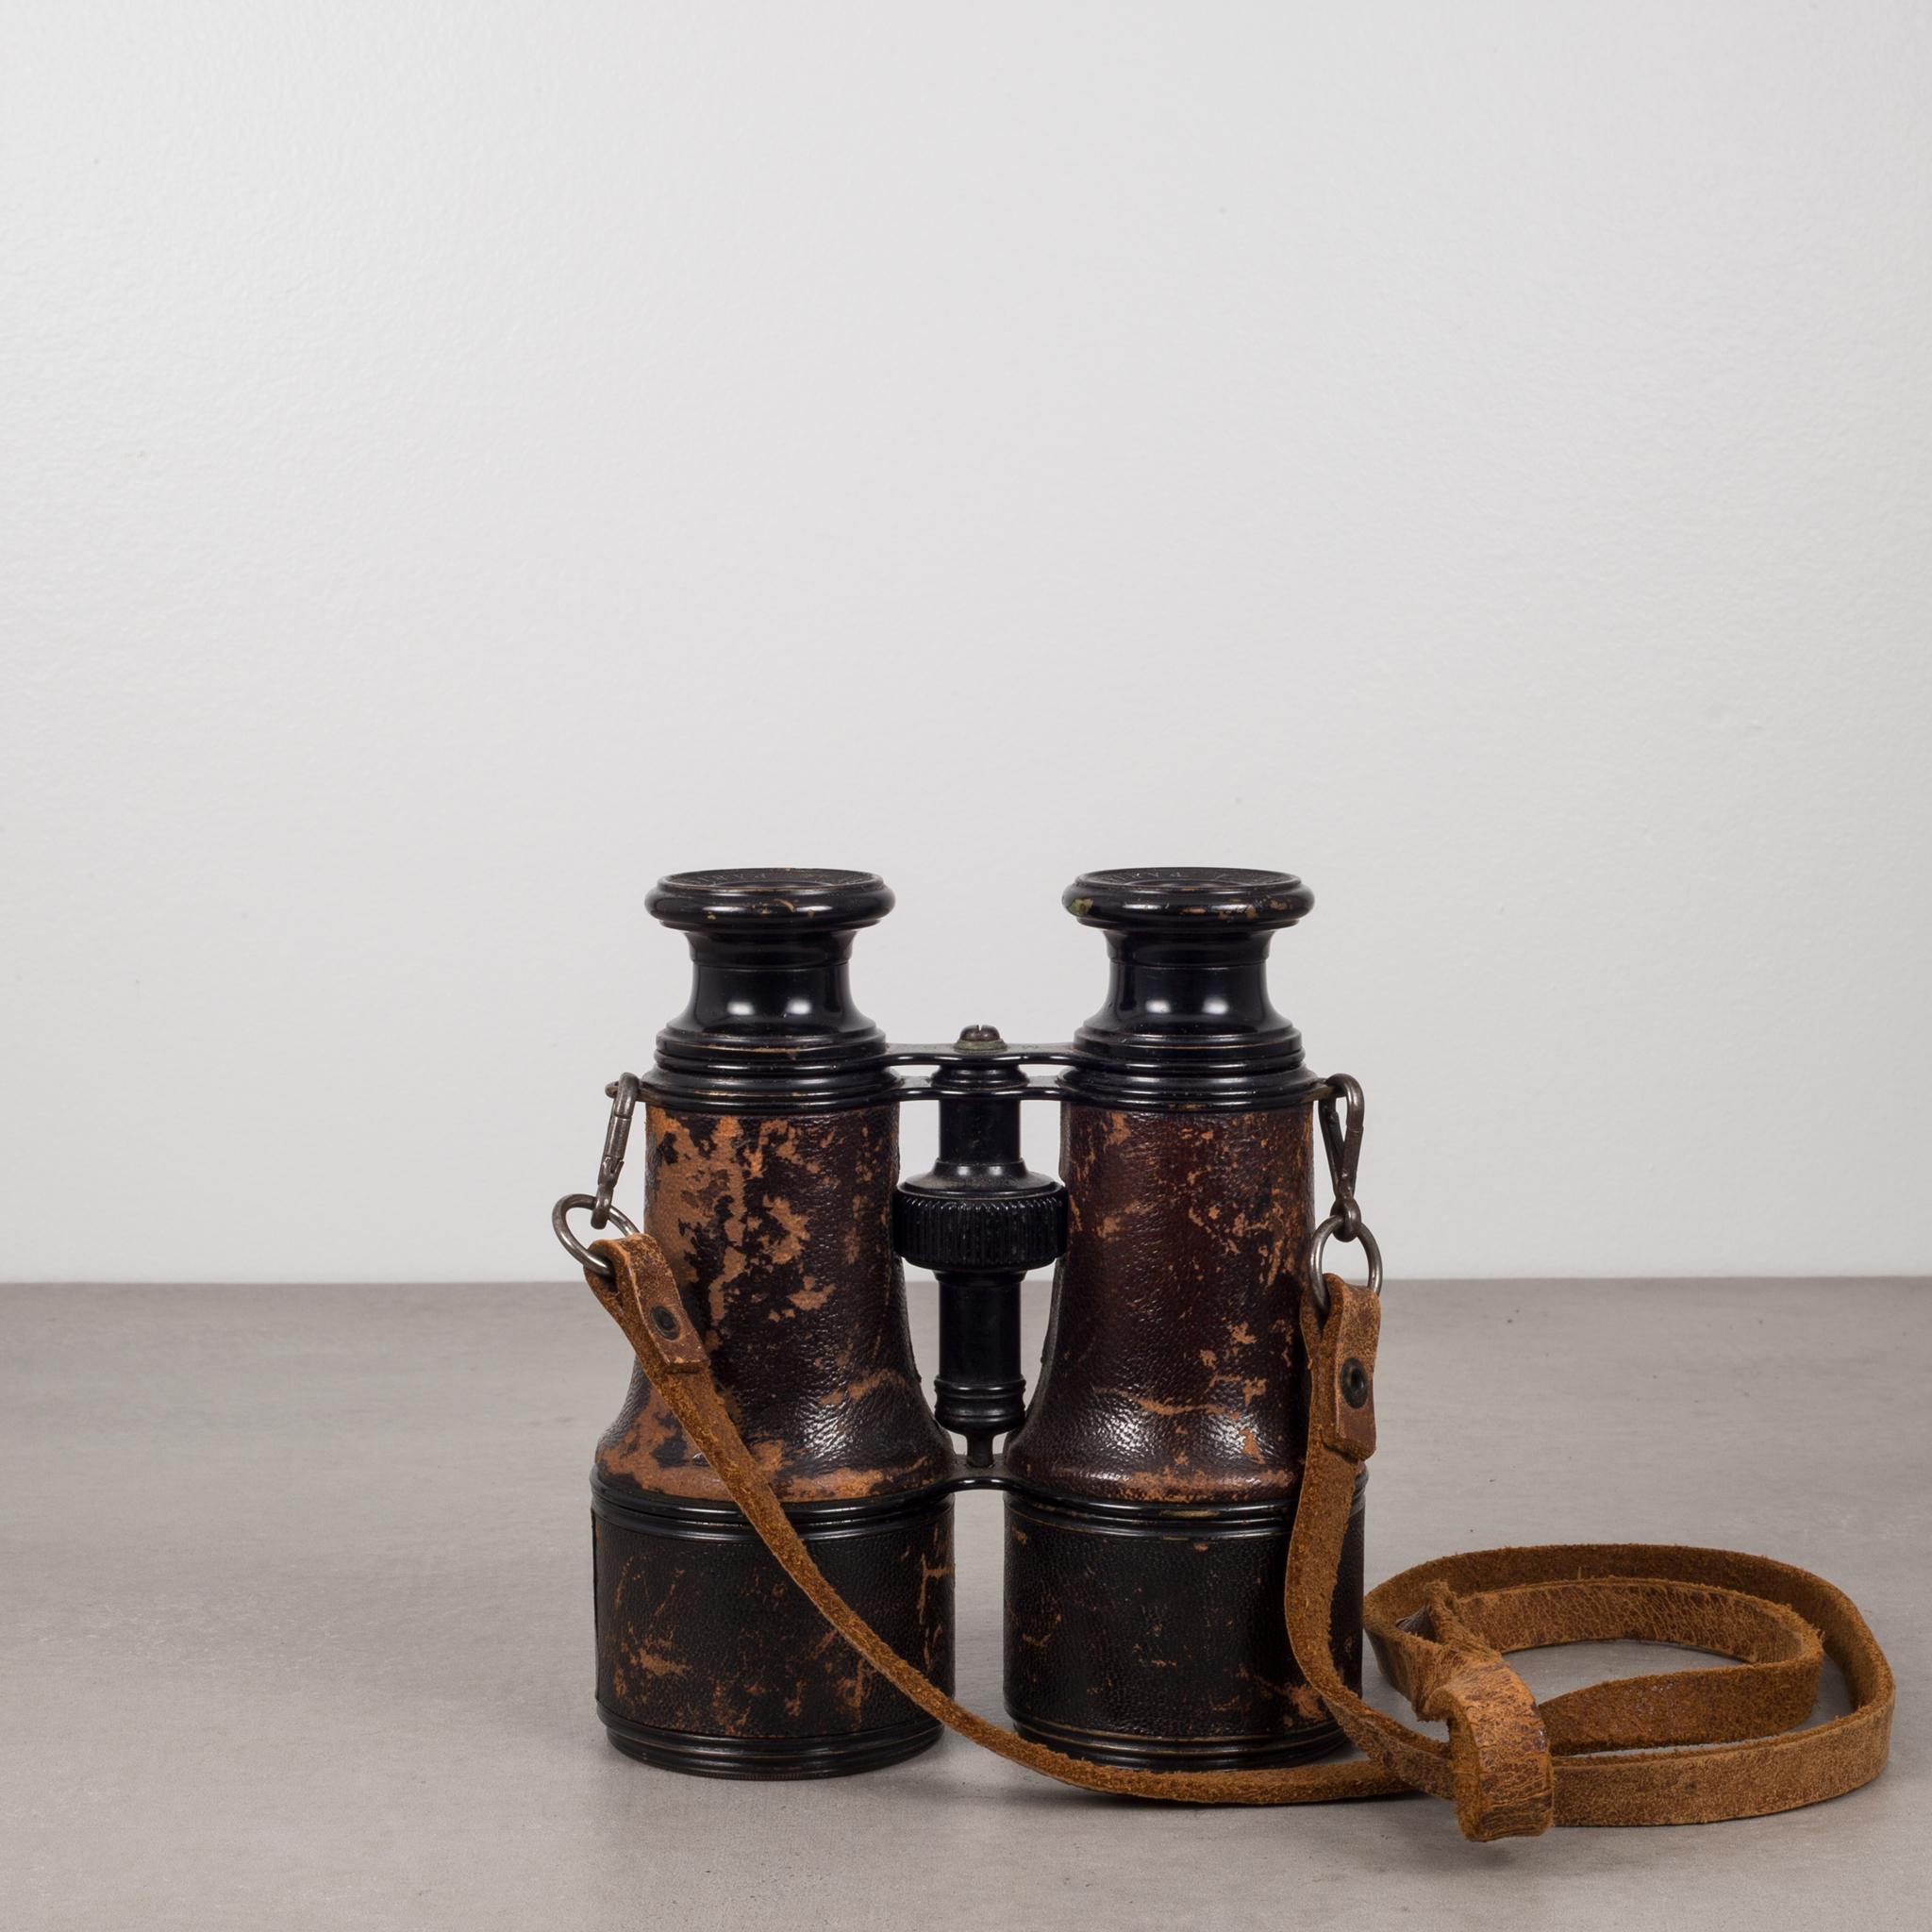 Beautiful pair of leather wrapped, ebonized brass binoculars with original, intact leather strap. Great working order with clear vision. Made in France by LeMaire Paris circa 1880s.